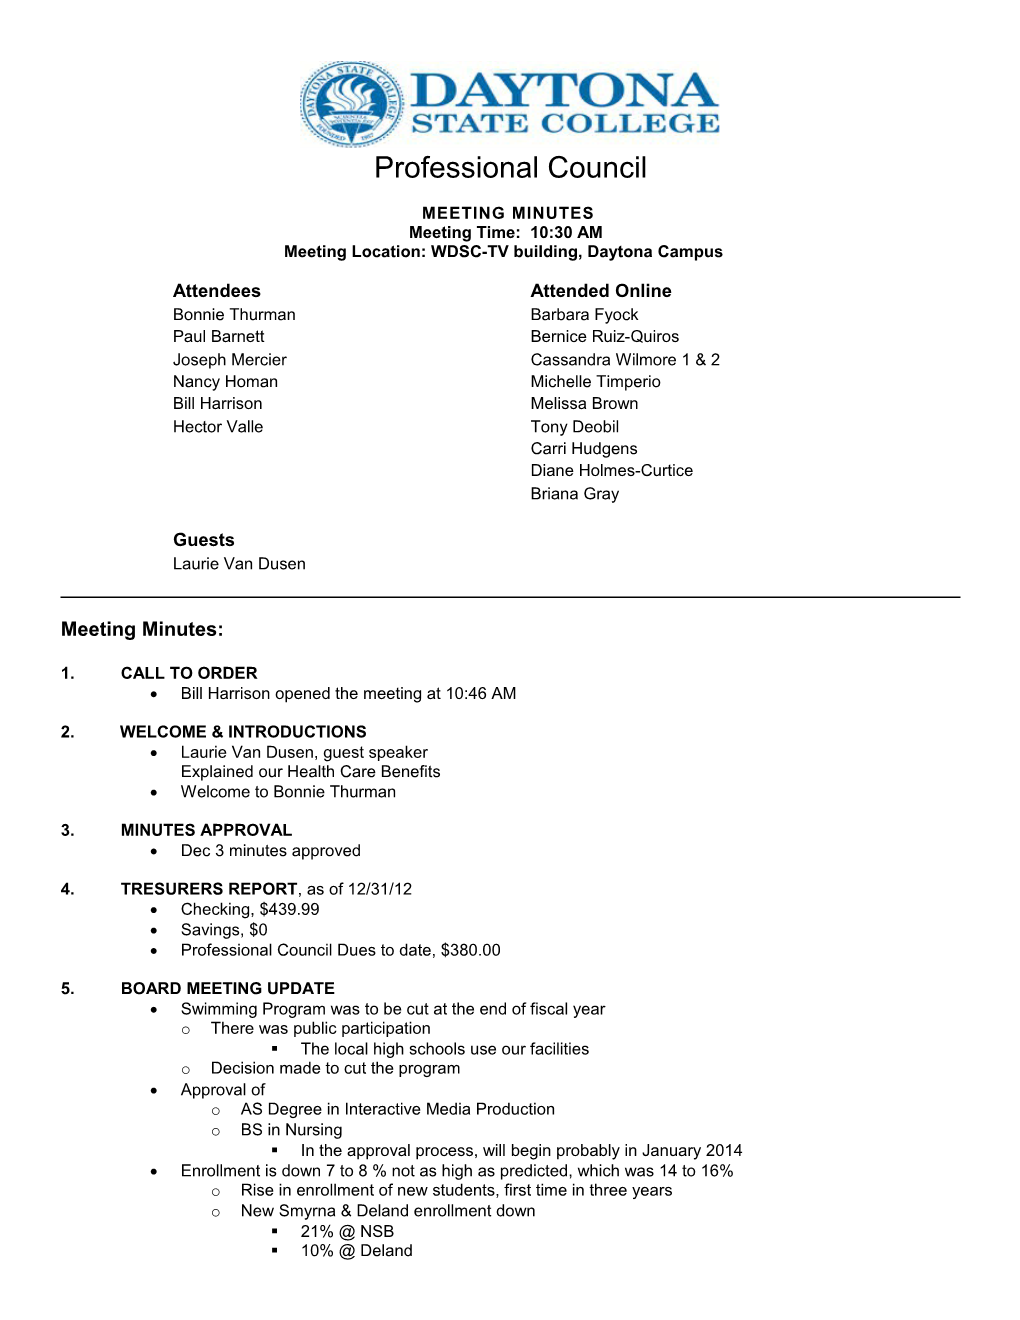 Meeting Minutes Template 9